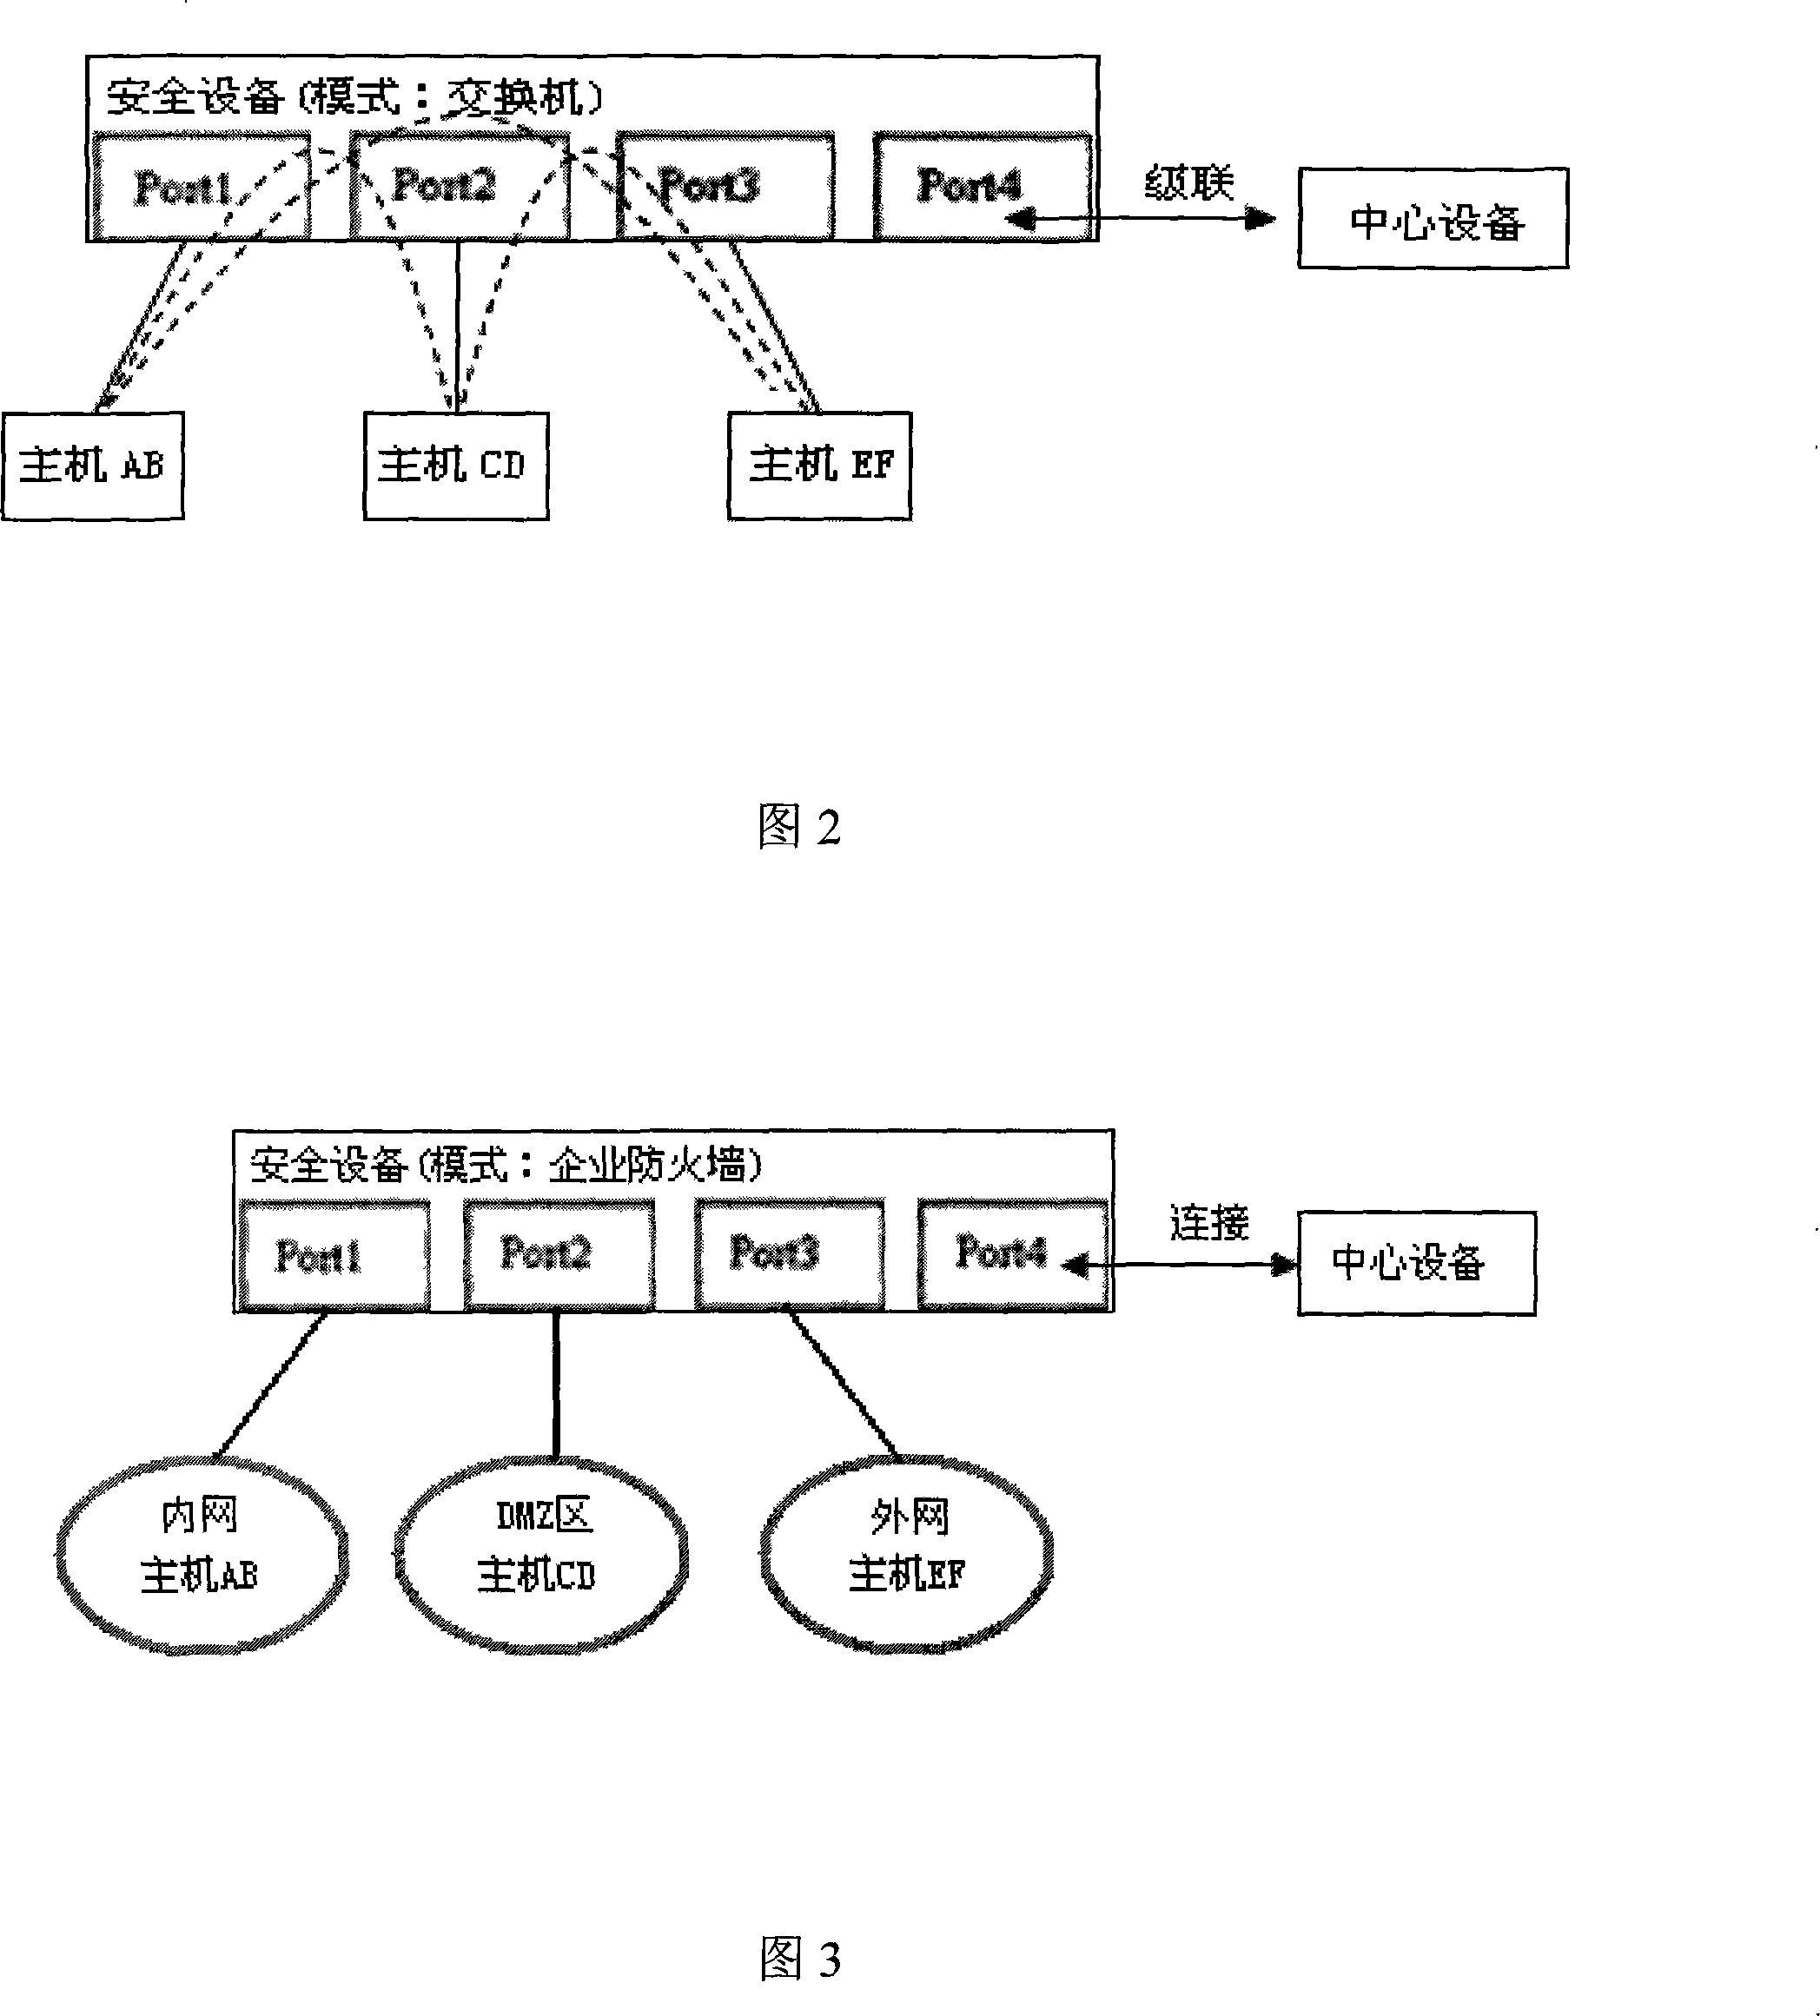 Teaching and testing device for network information security